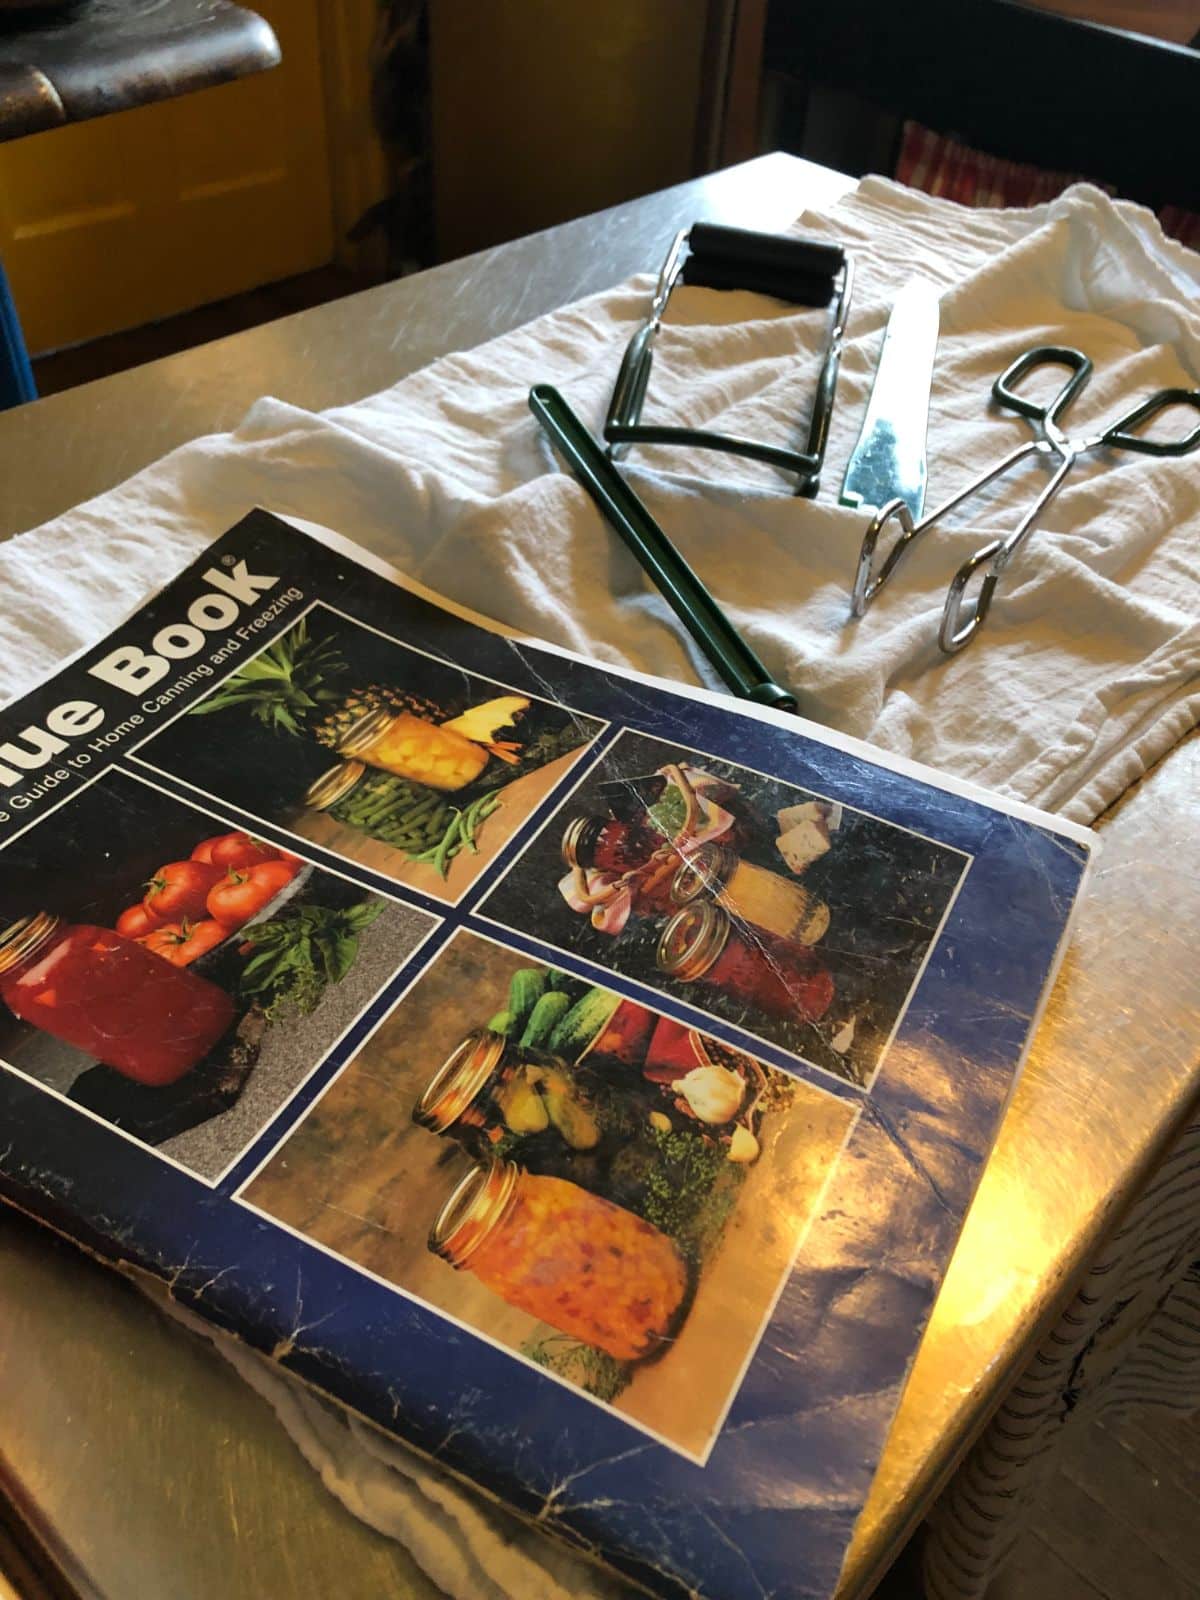 Basic canning utensils and a canning book